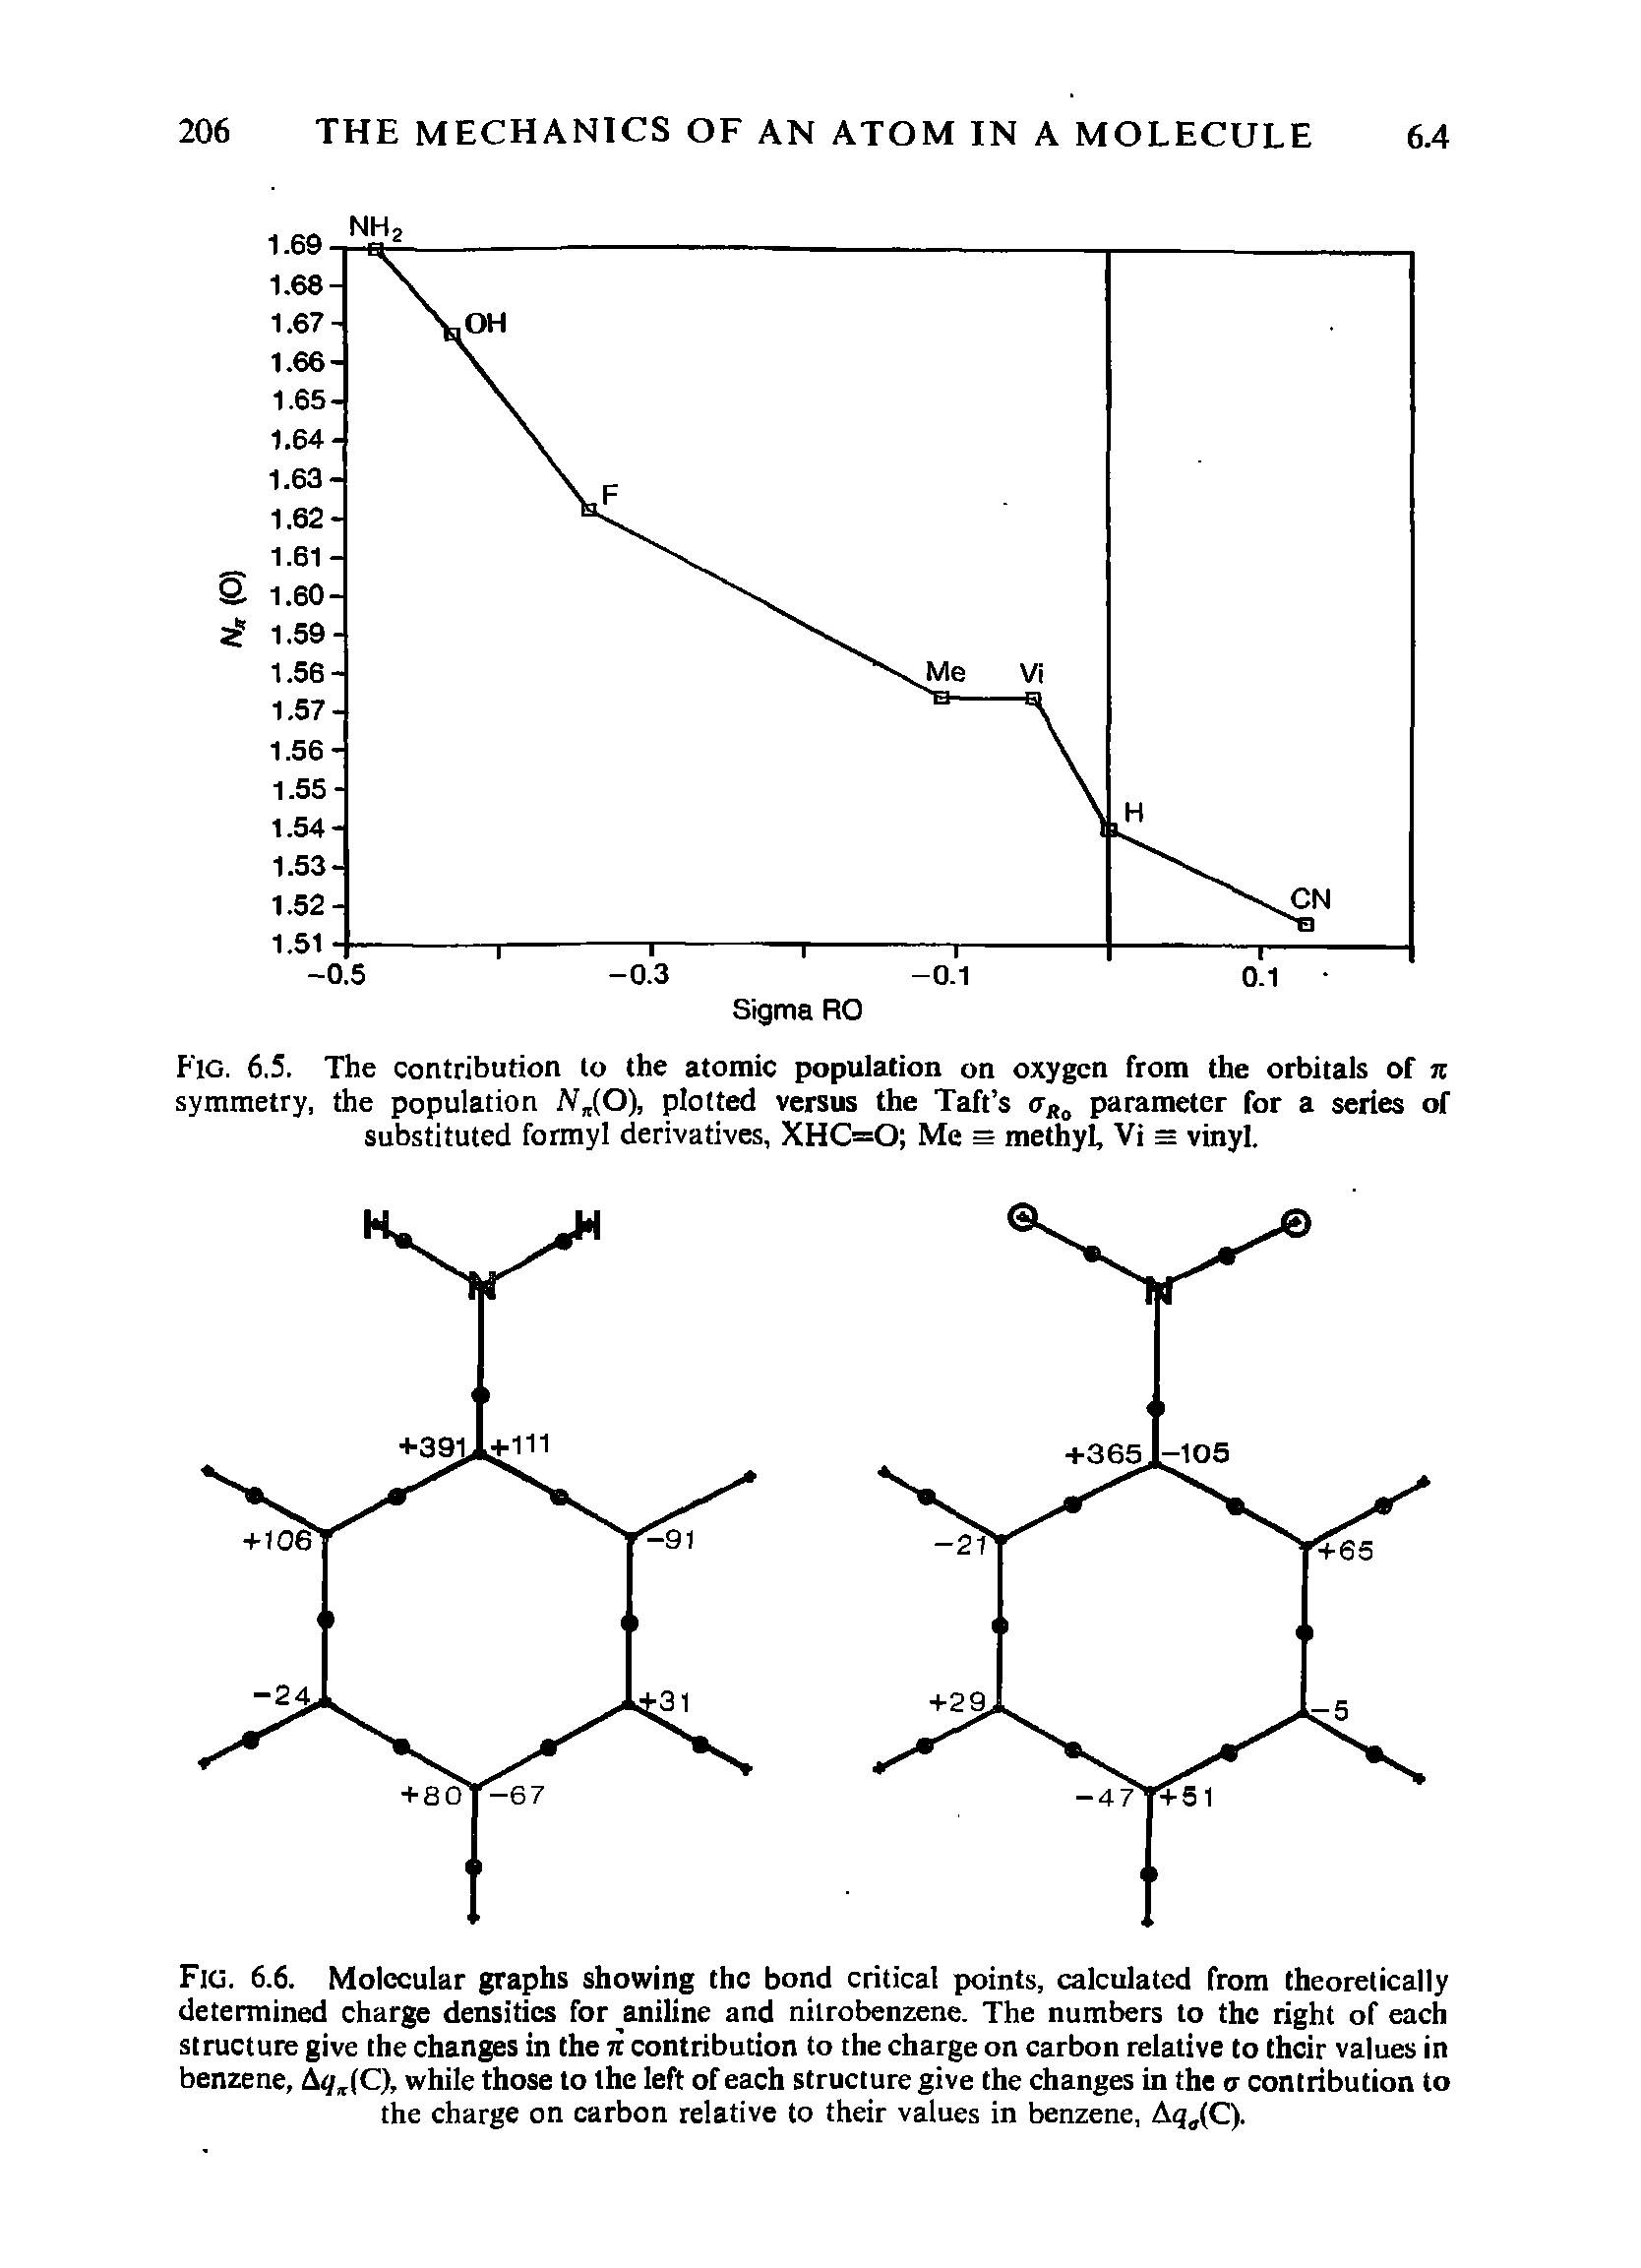 Fig. 6.6. Molecular graphs showing the bond critical points, calculated from theoretically determined charge densities for aniline and nitrobenzene. The numbers to the right of each structure give the changes in the f contribution to the charge on carbon relative to their values in benzene, while those to the left of each structure give the changes in the a contribution to...